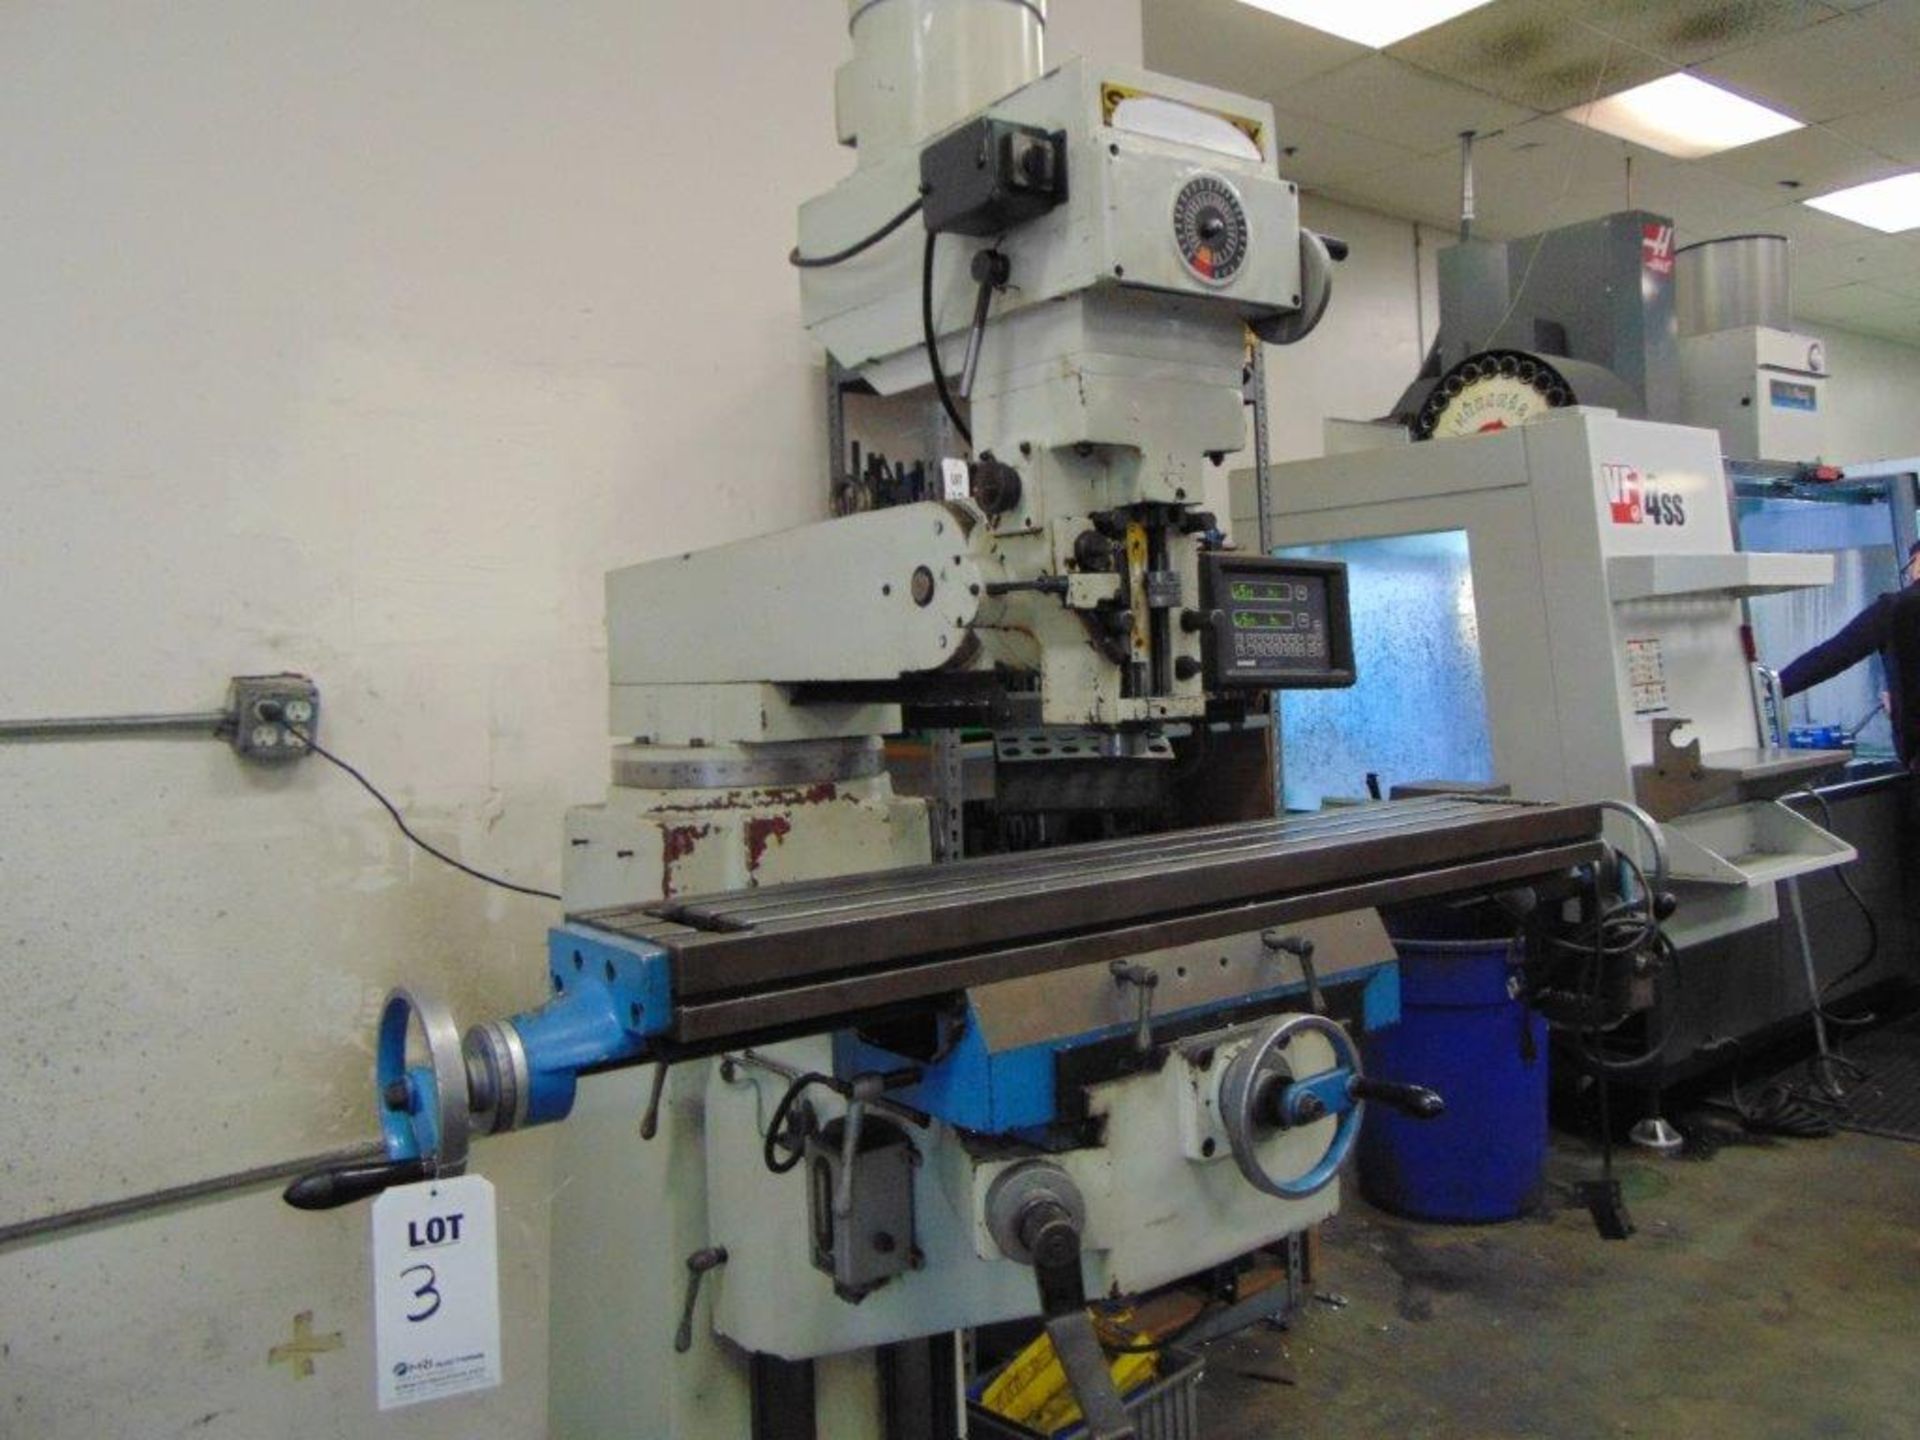 1996 SUPERMAX VCM-16VS, VERTICAL MANUAL MILL, S/N 6055267, 49" X 9" TABLE - Image 2 of 2